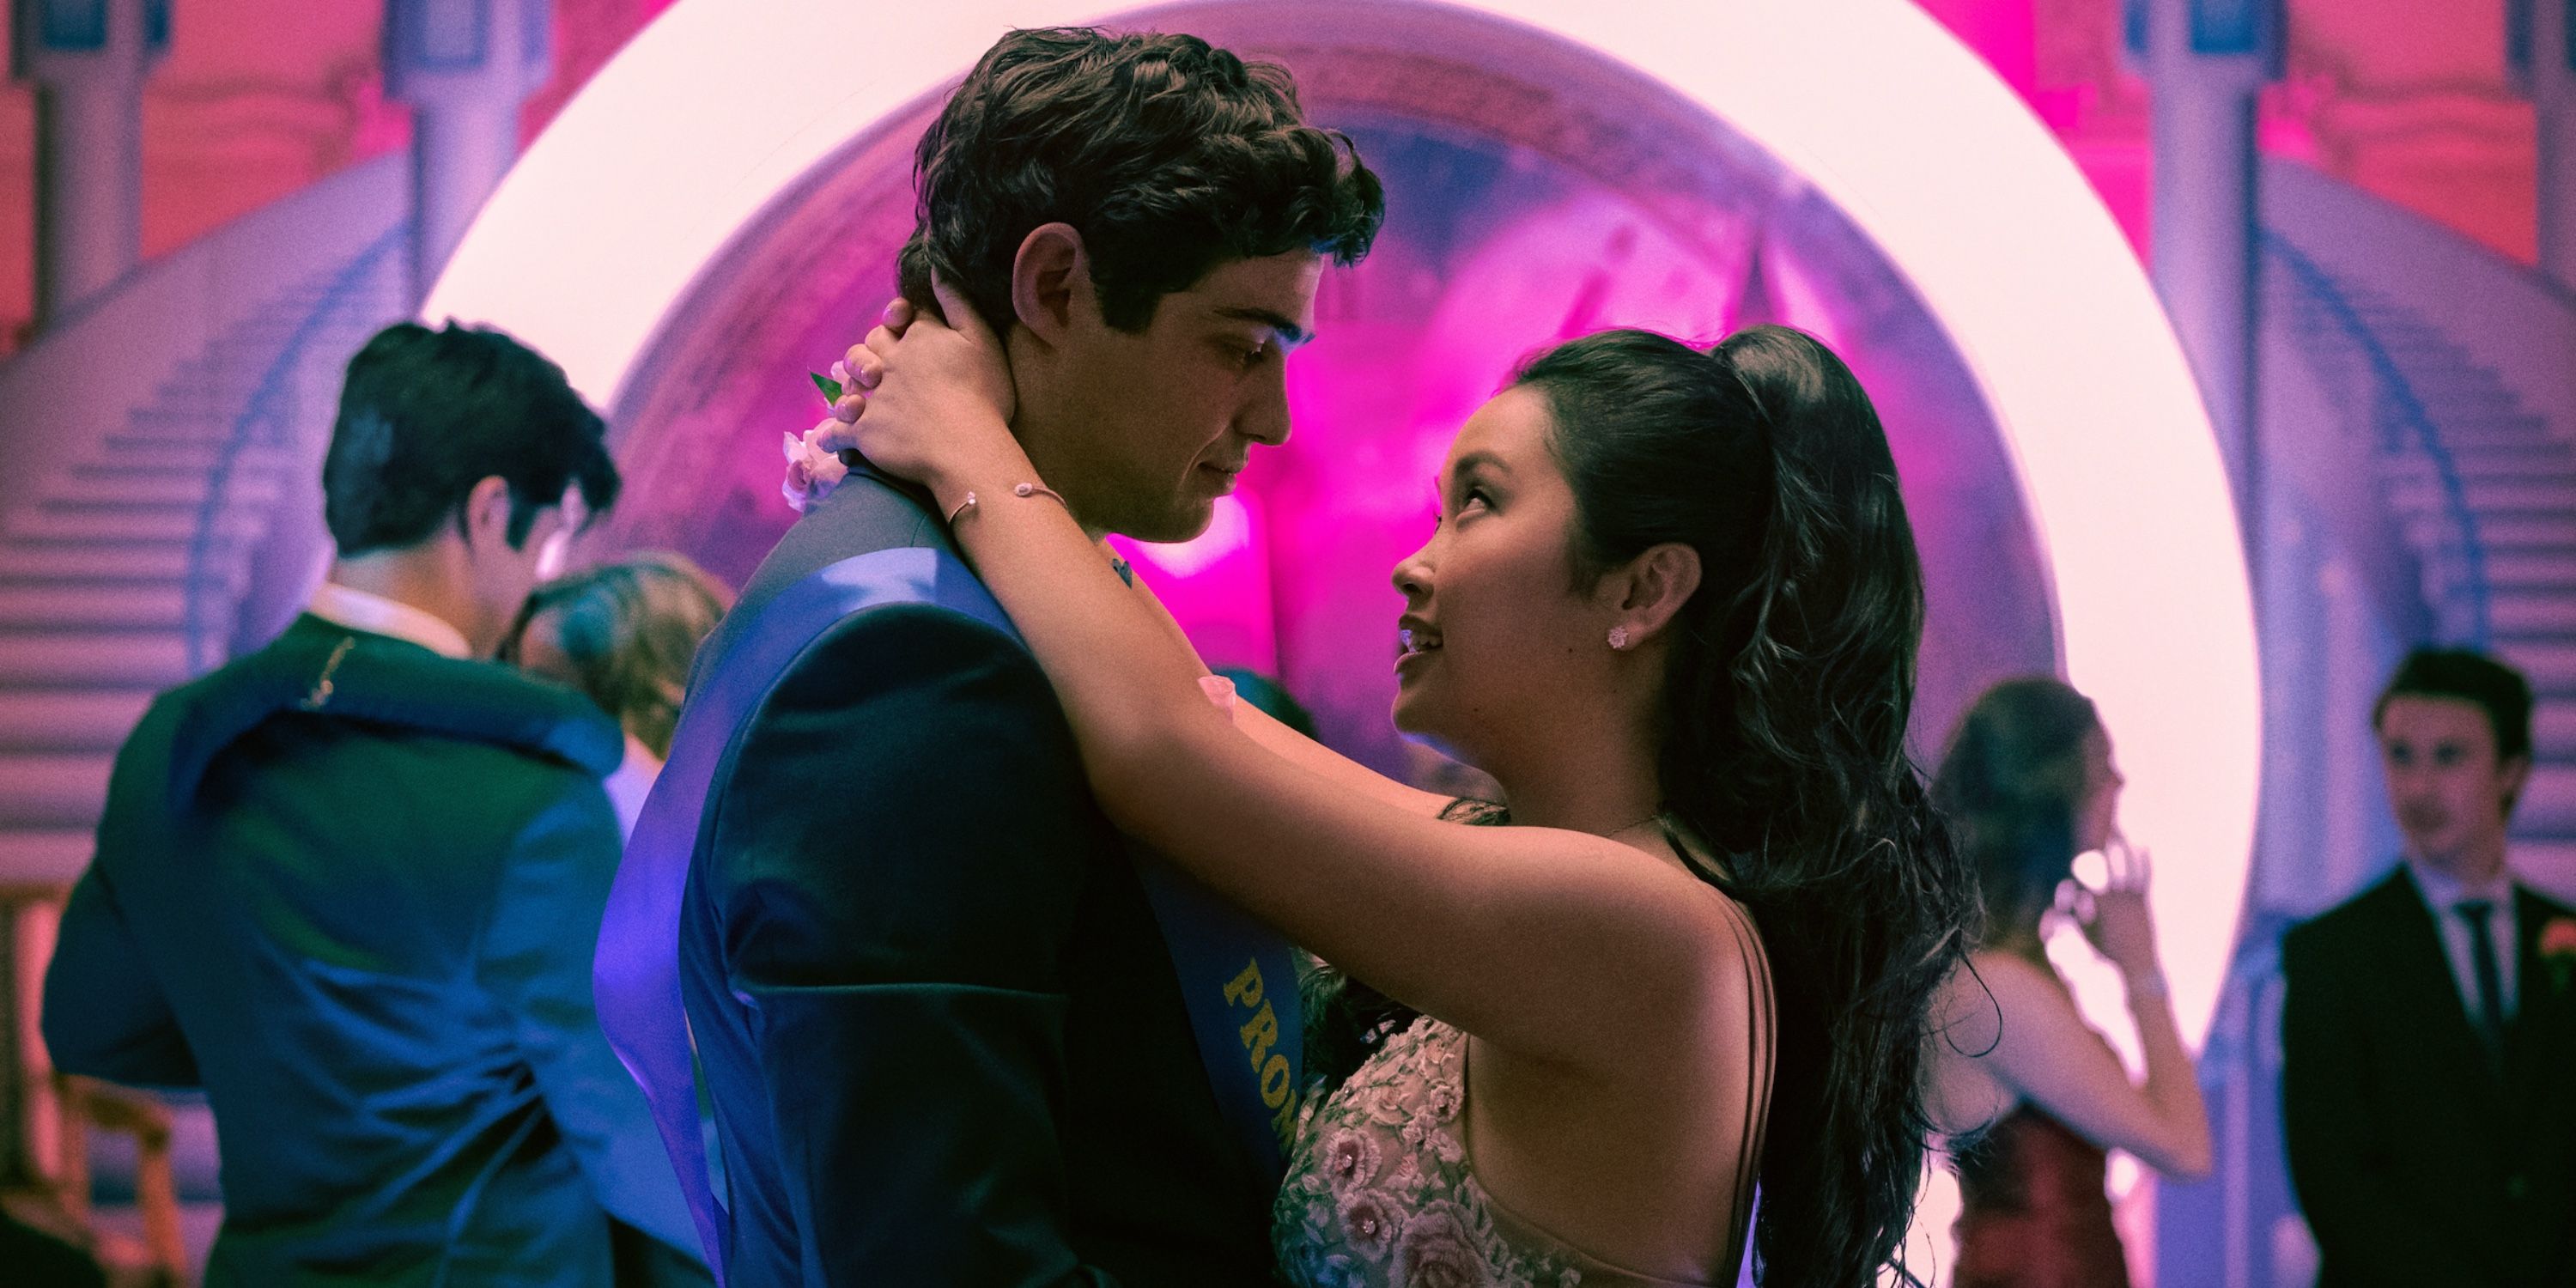 Noah Centineo and Lana Condor in To All the Boys: Always and Forever on Netflix